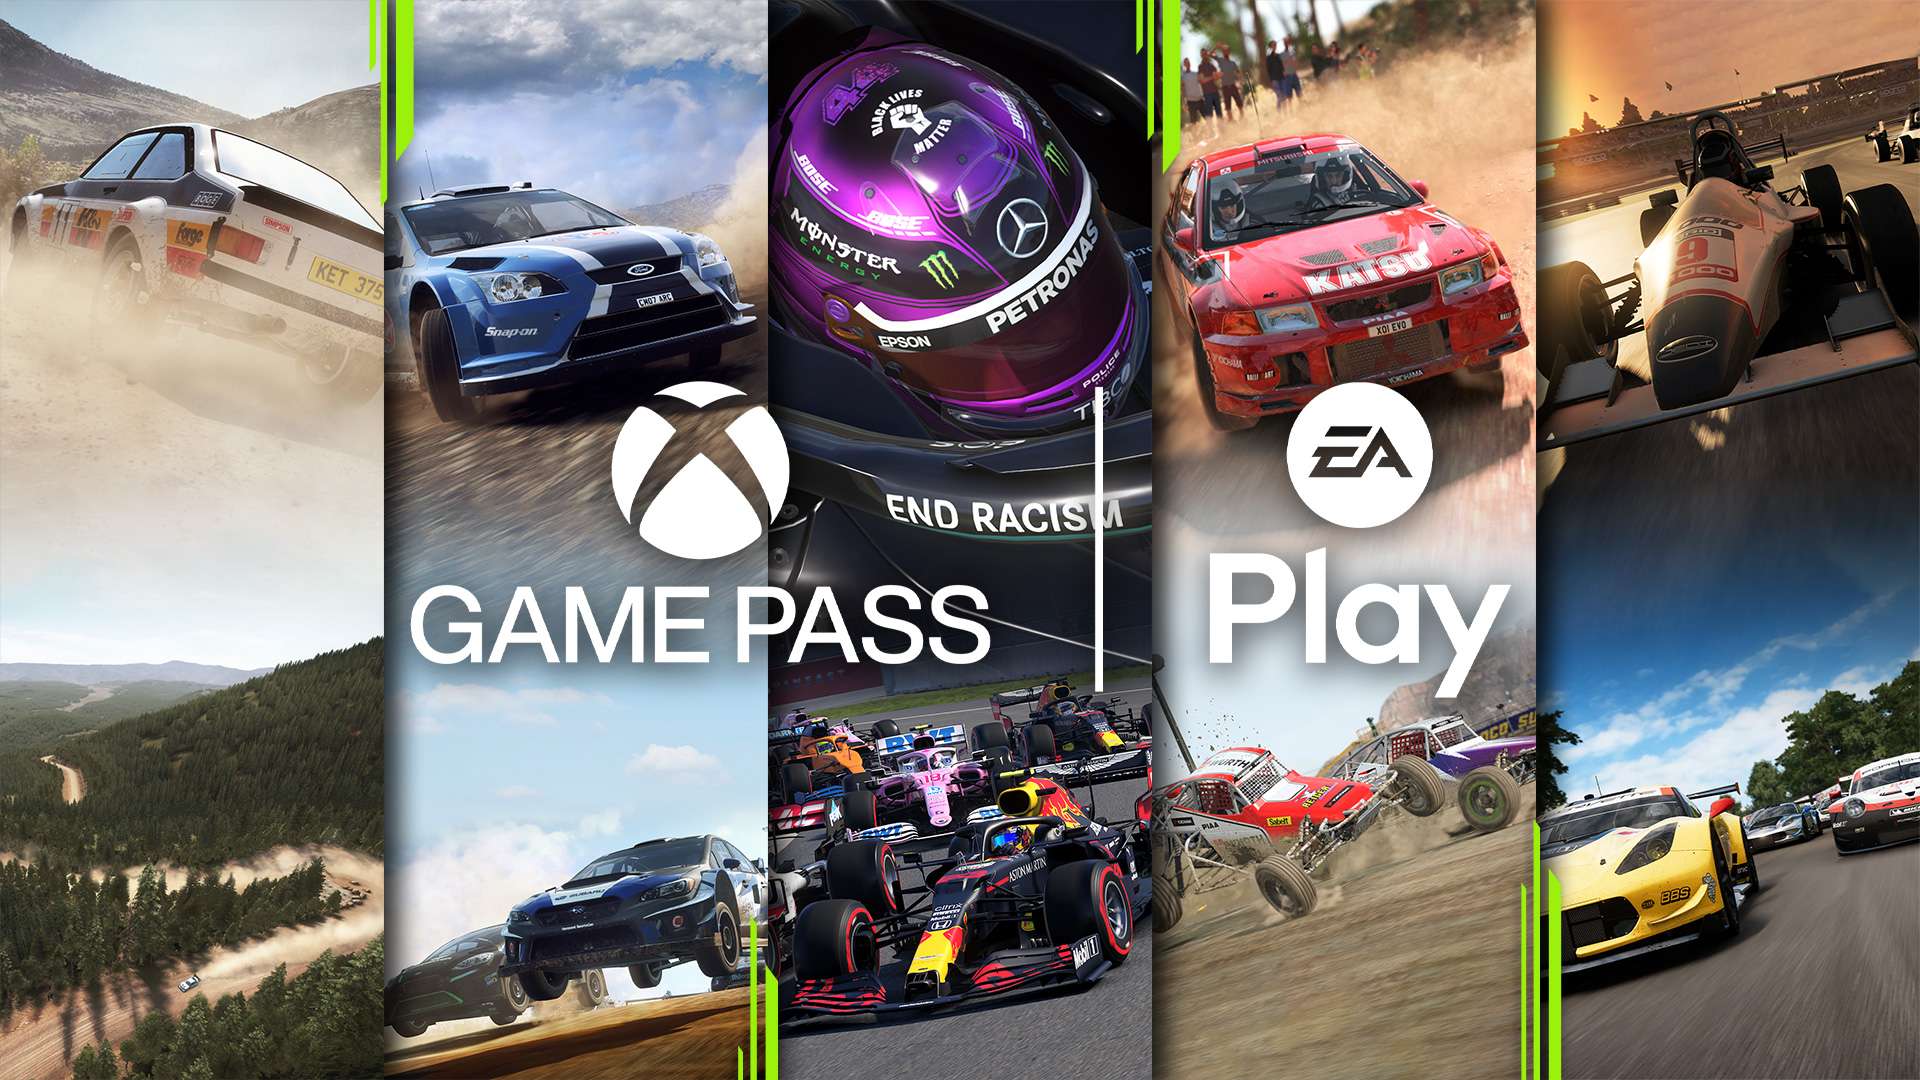 Dive into June's Member Benefits with EA Play and Game Pass - Xbox